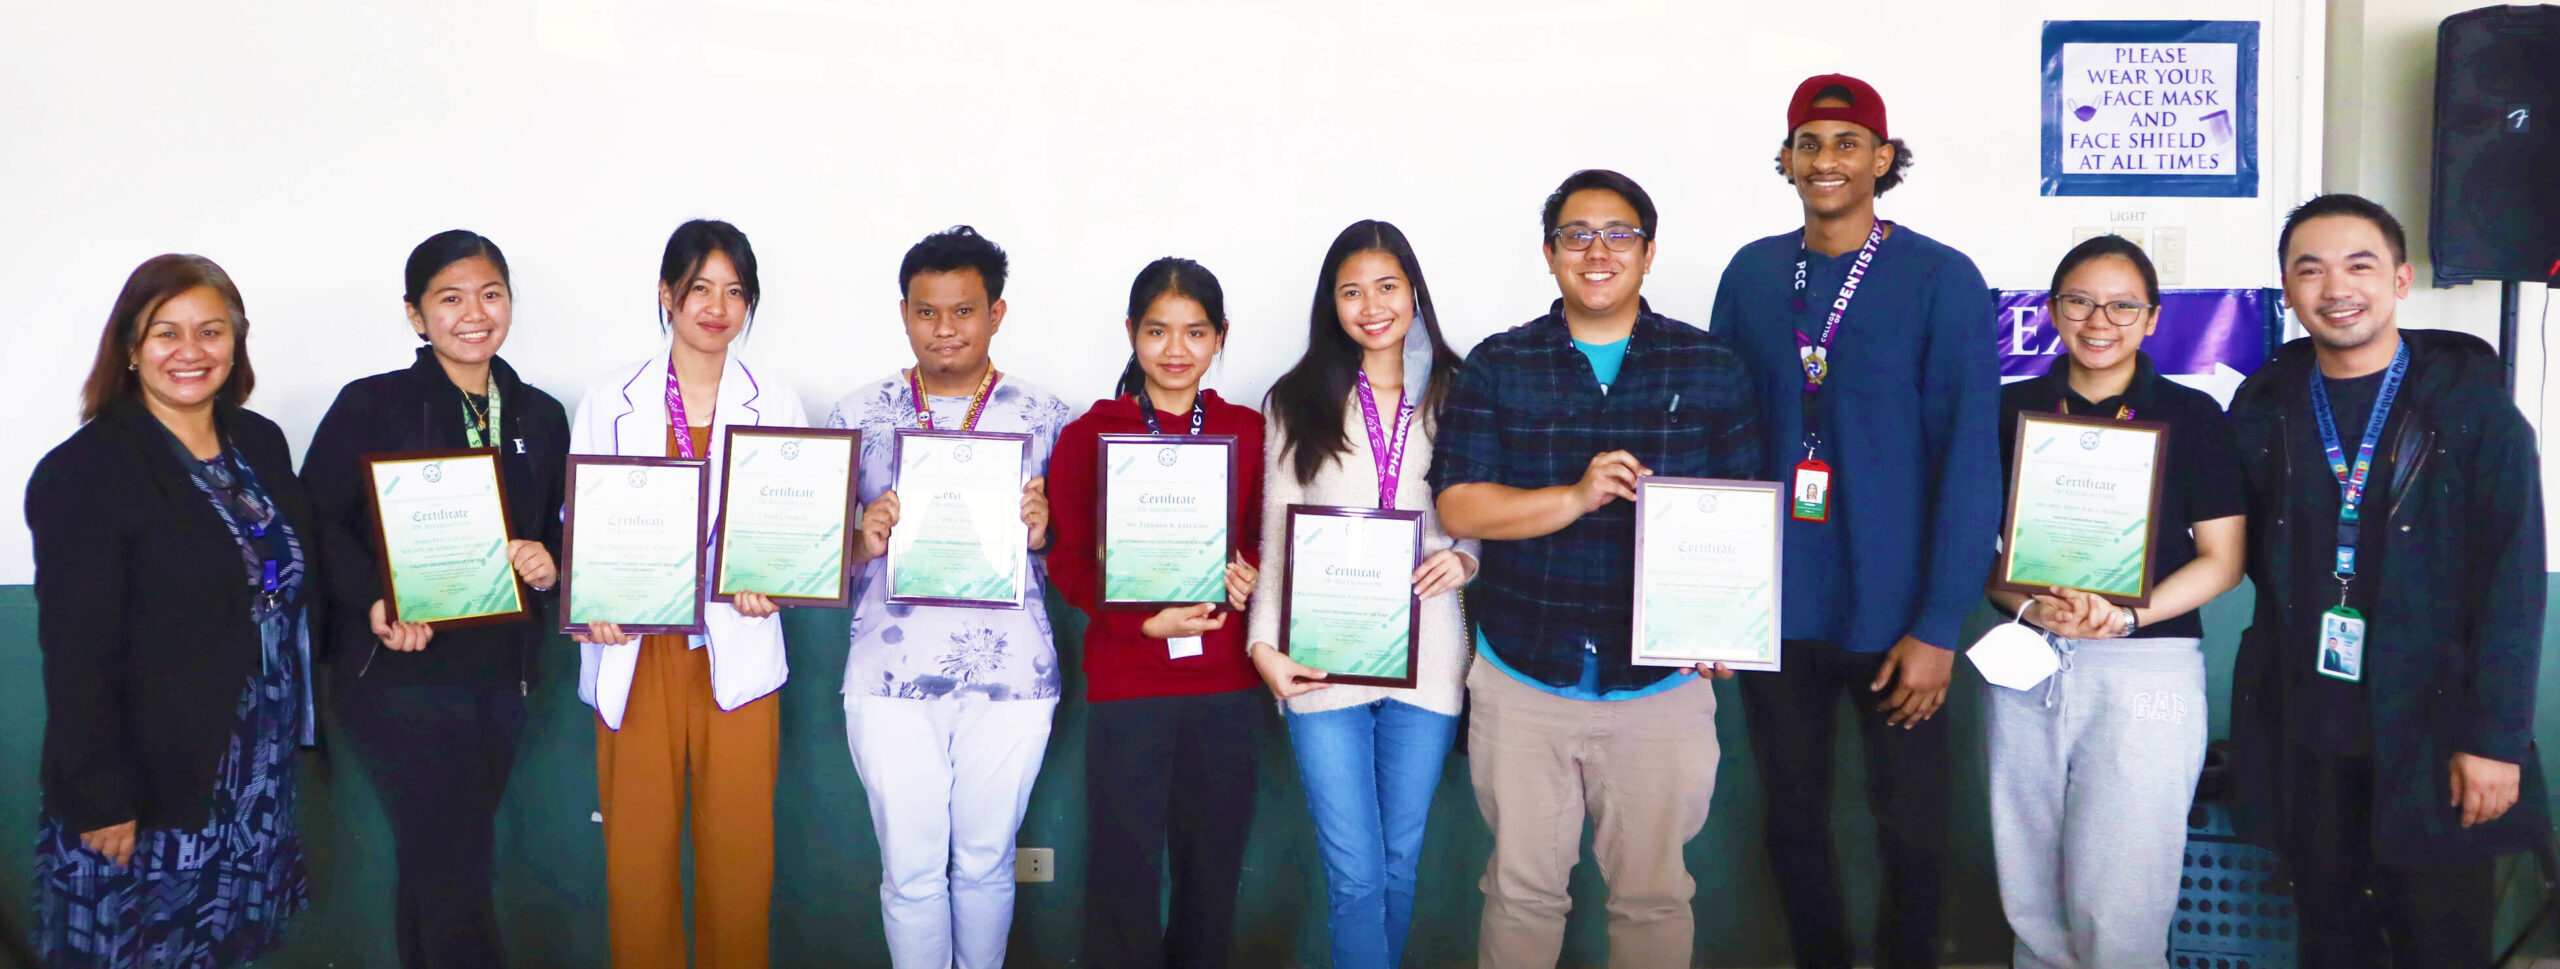 PCC Students and Organizations Recognized in GAWAD PINES Awarding ...